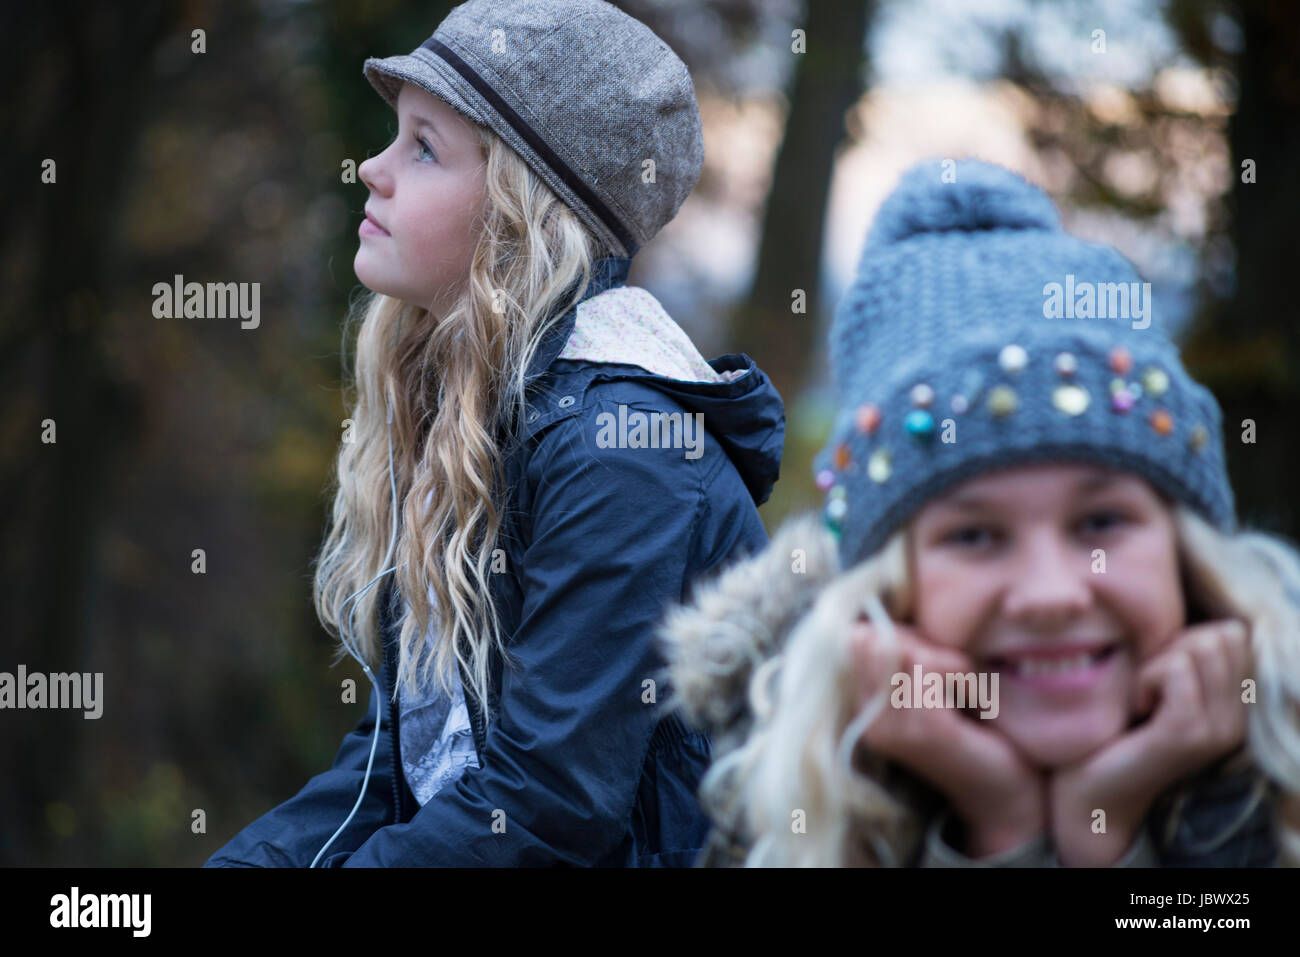 Portrait of girl and her sister in rural landscape wearing knit hat Stock Photo